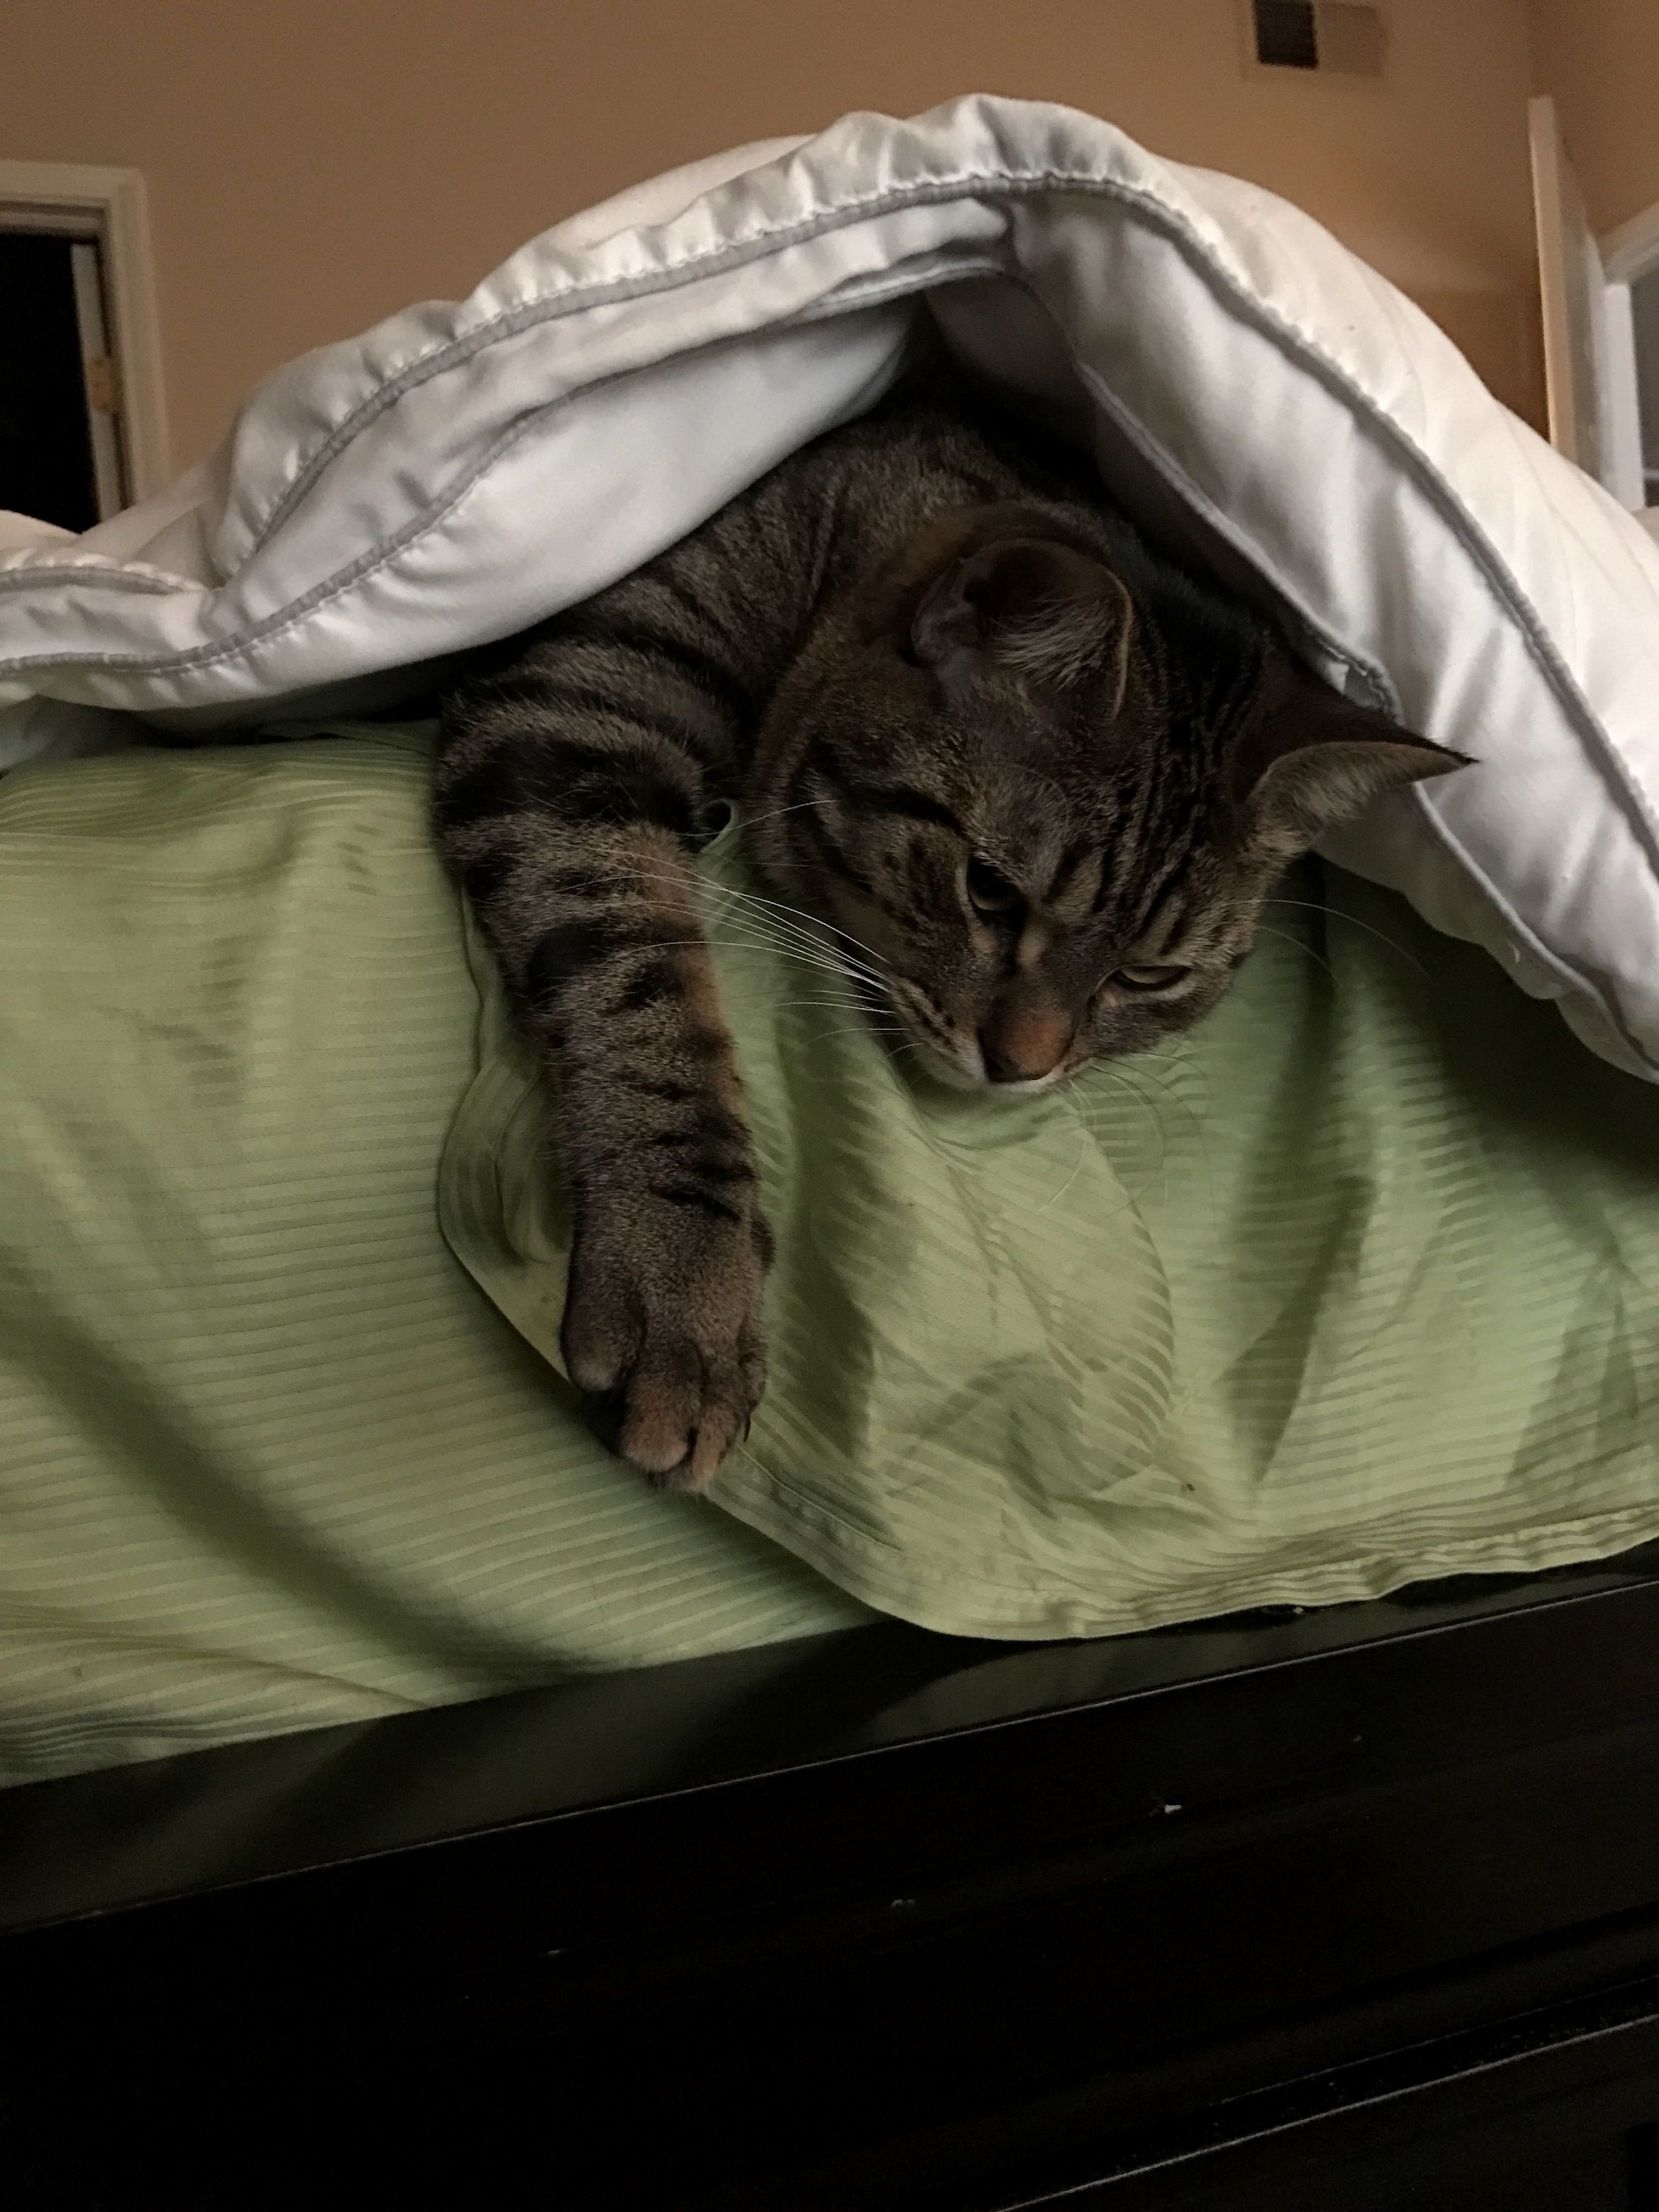 Dexter loves to sleep under covers